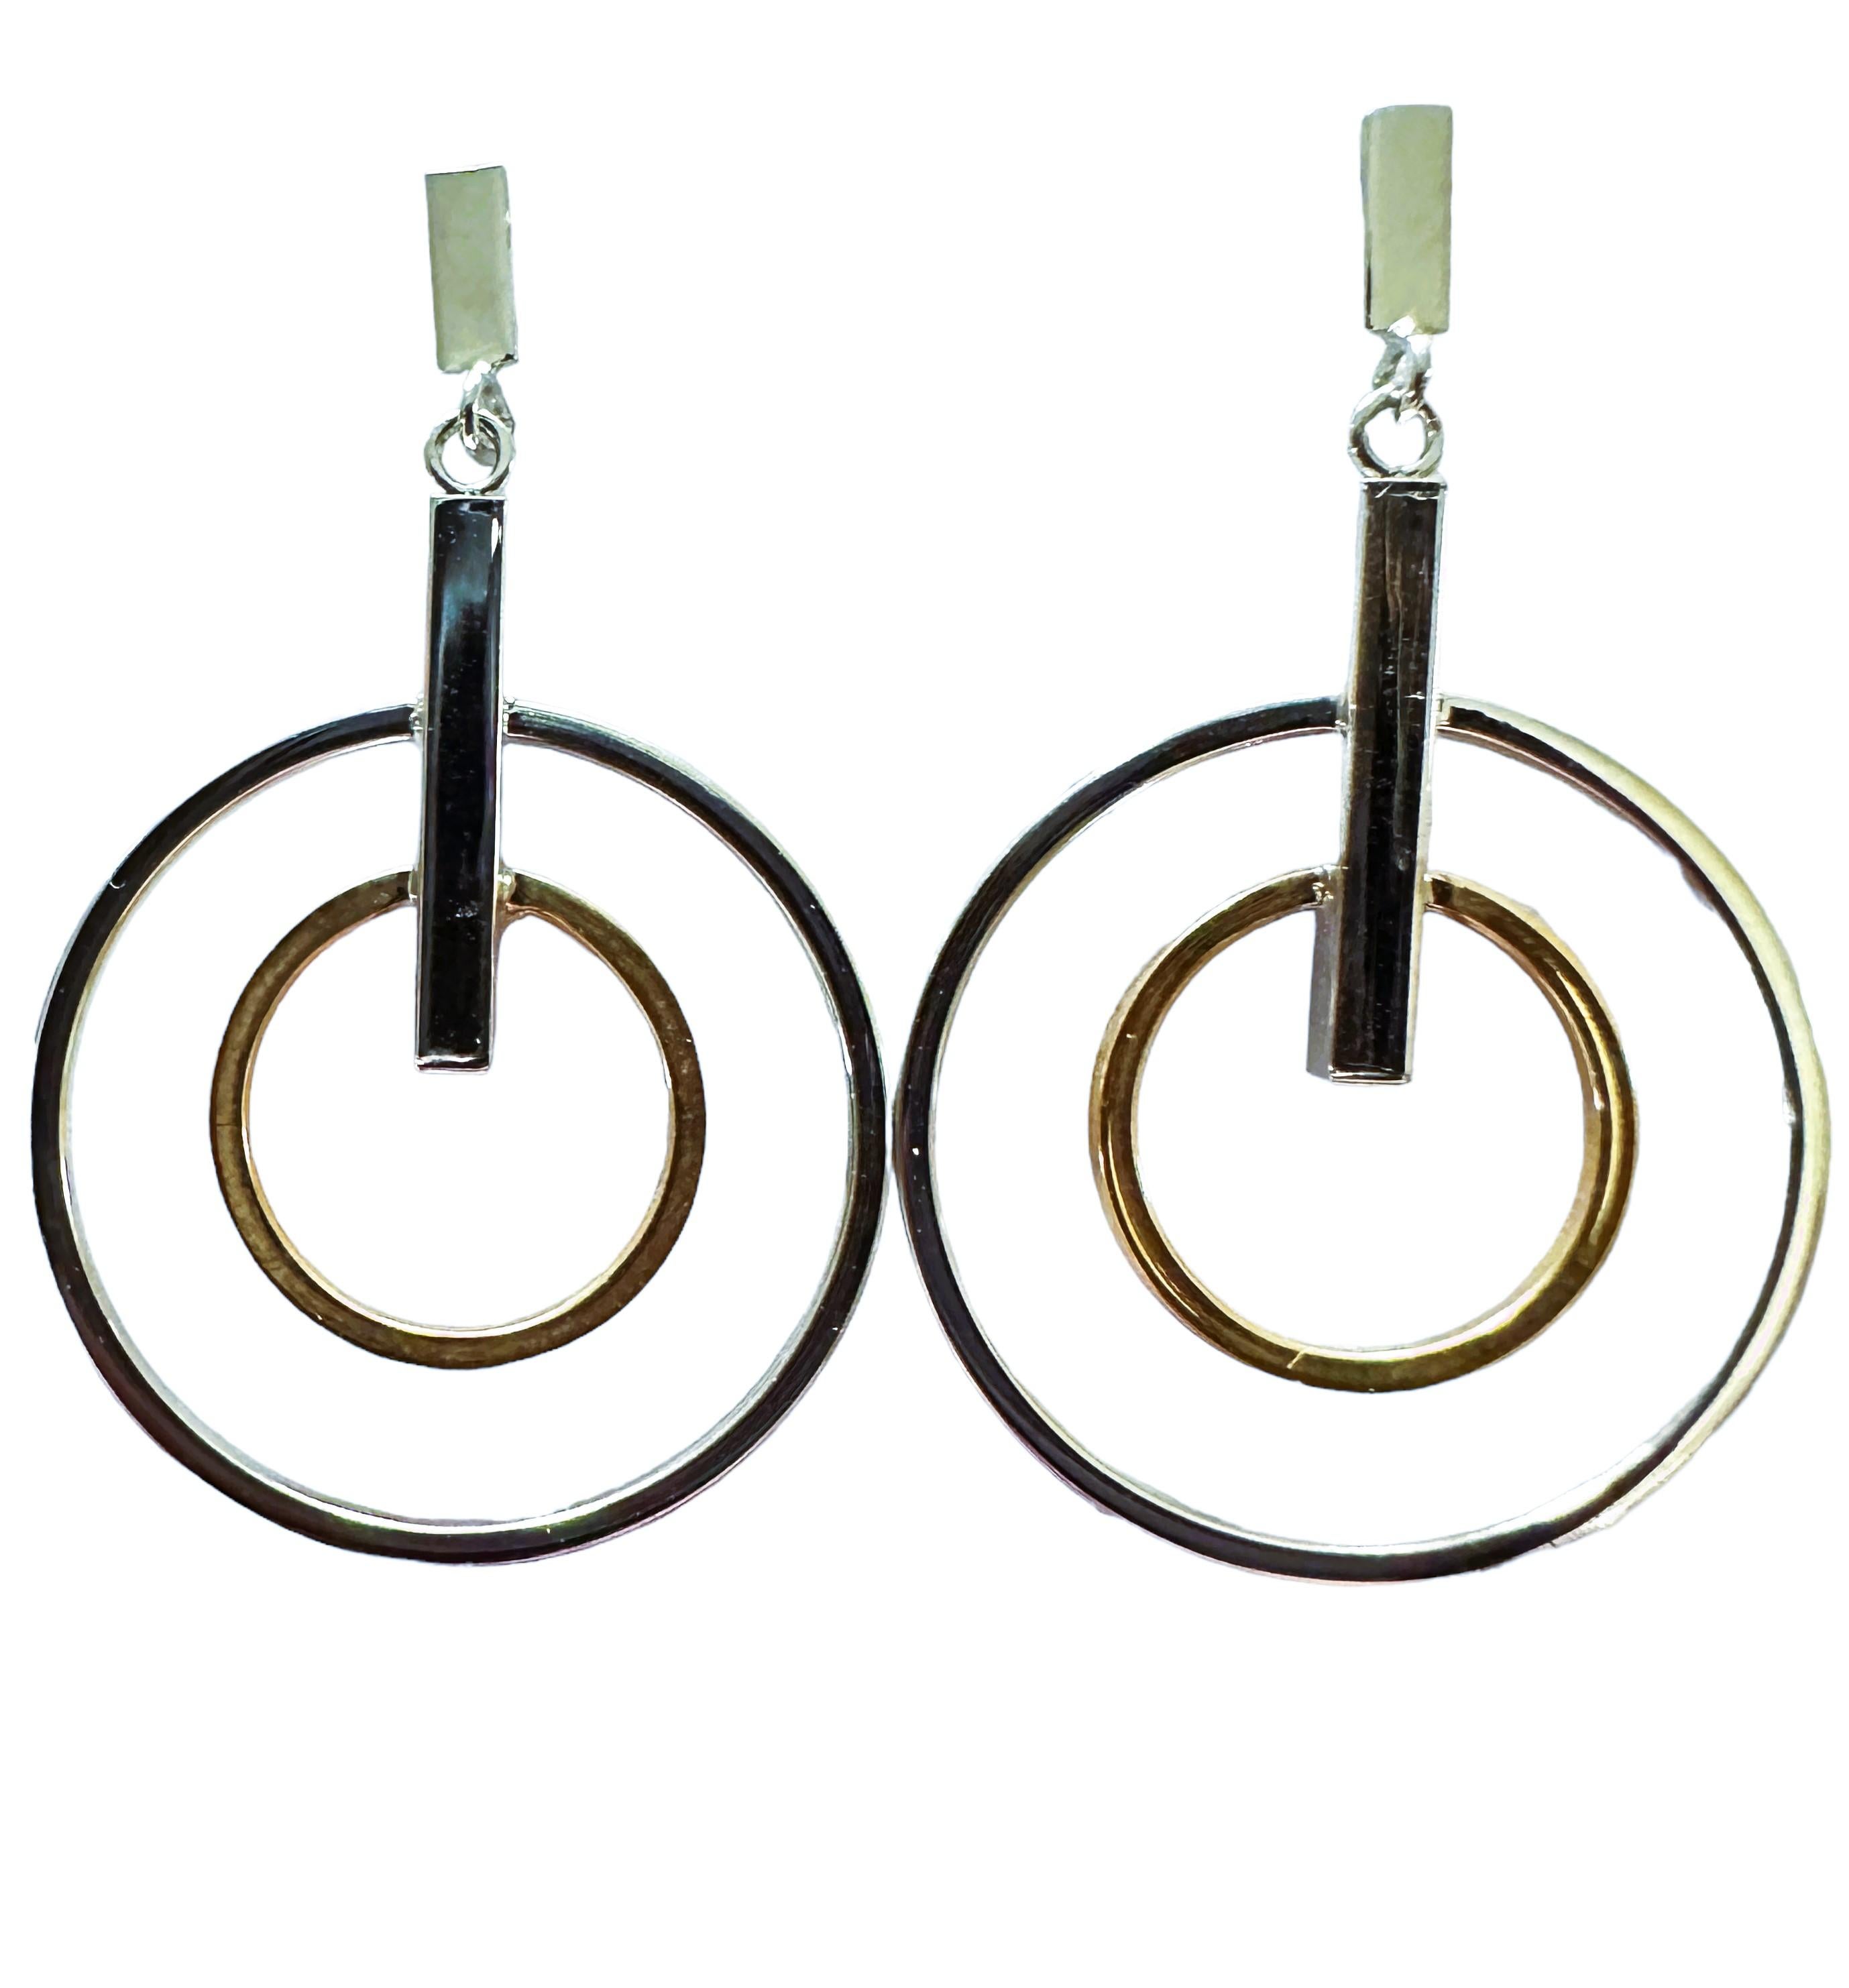 14k Yellow Gold & White Gold Circular Post Earrings In Excellent Condition For Sale In Eagan, MN